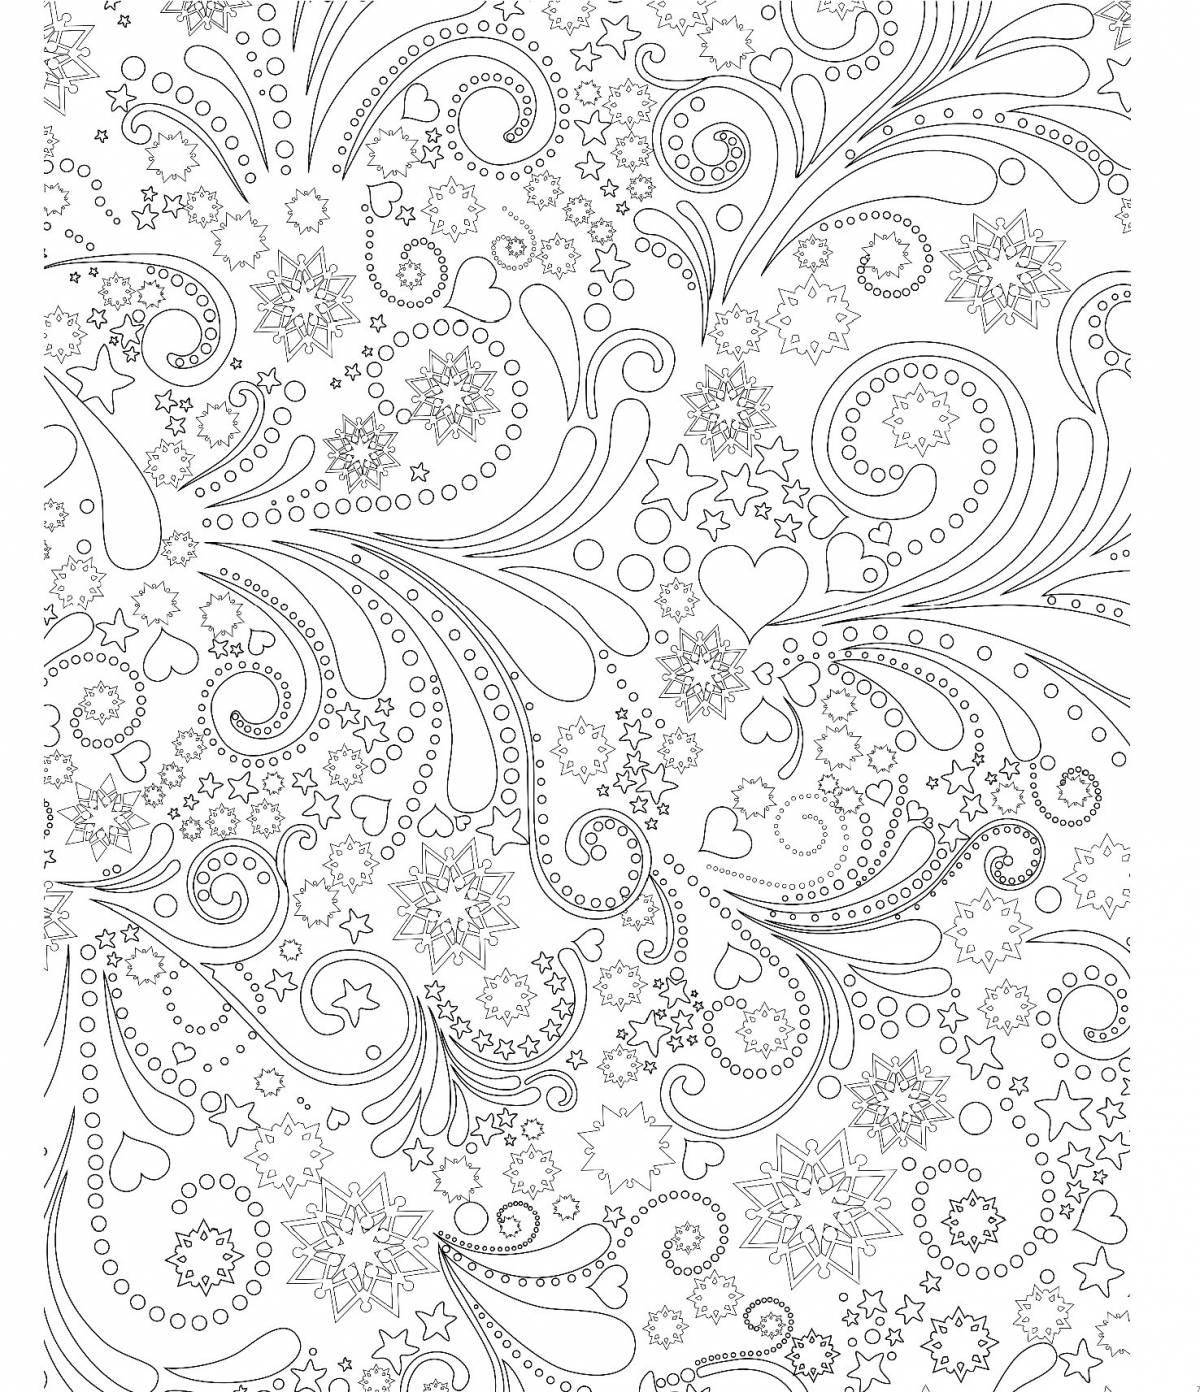 Fascinating coloring pages magical patterns